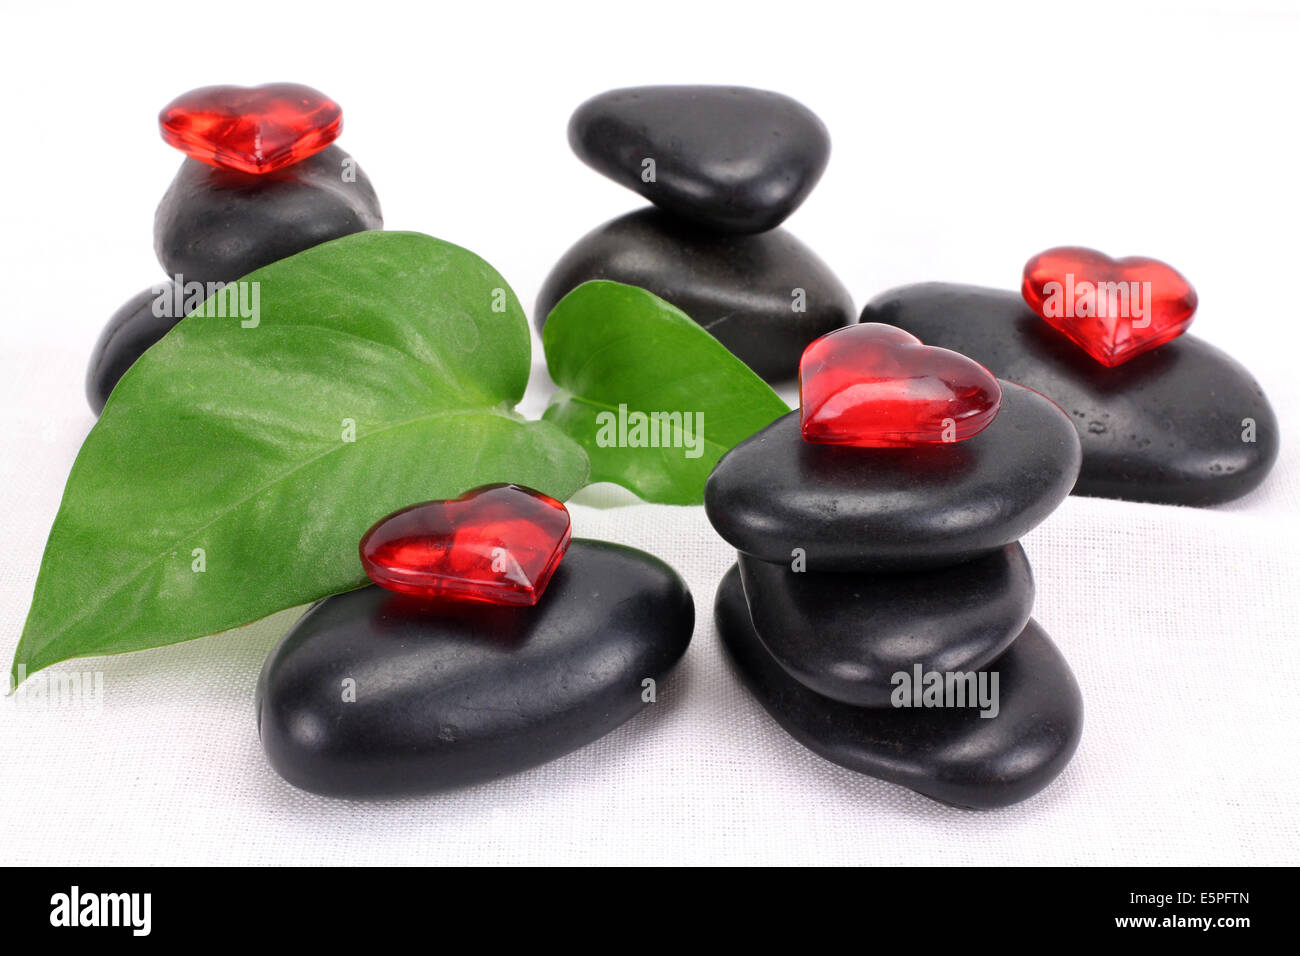 A pile of balanced black spa therapy stones Stock Photo